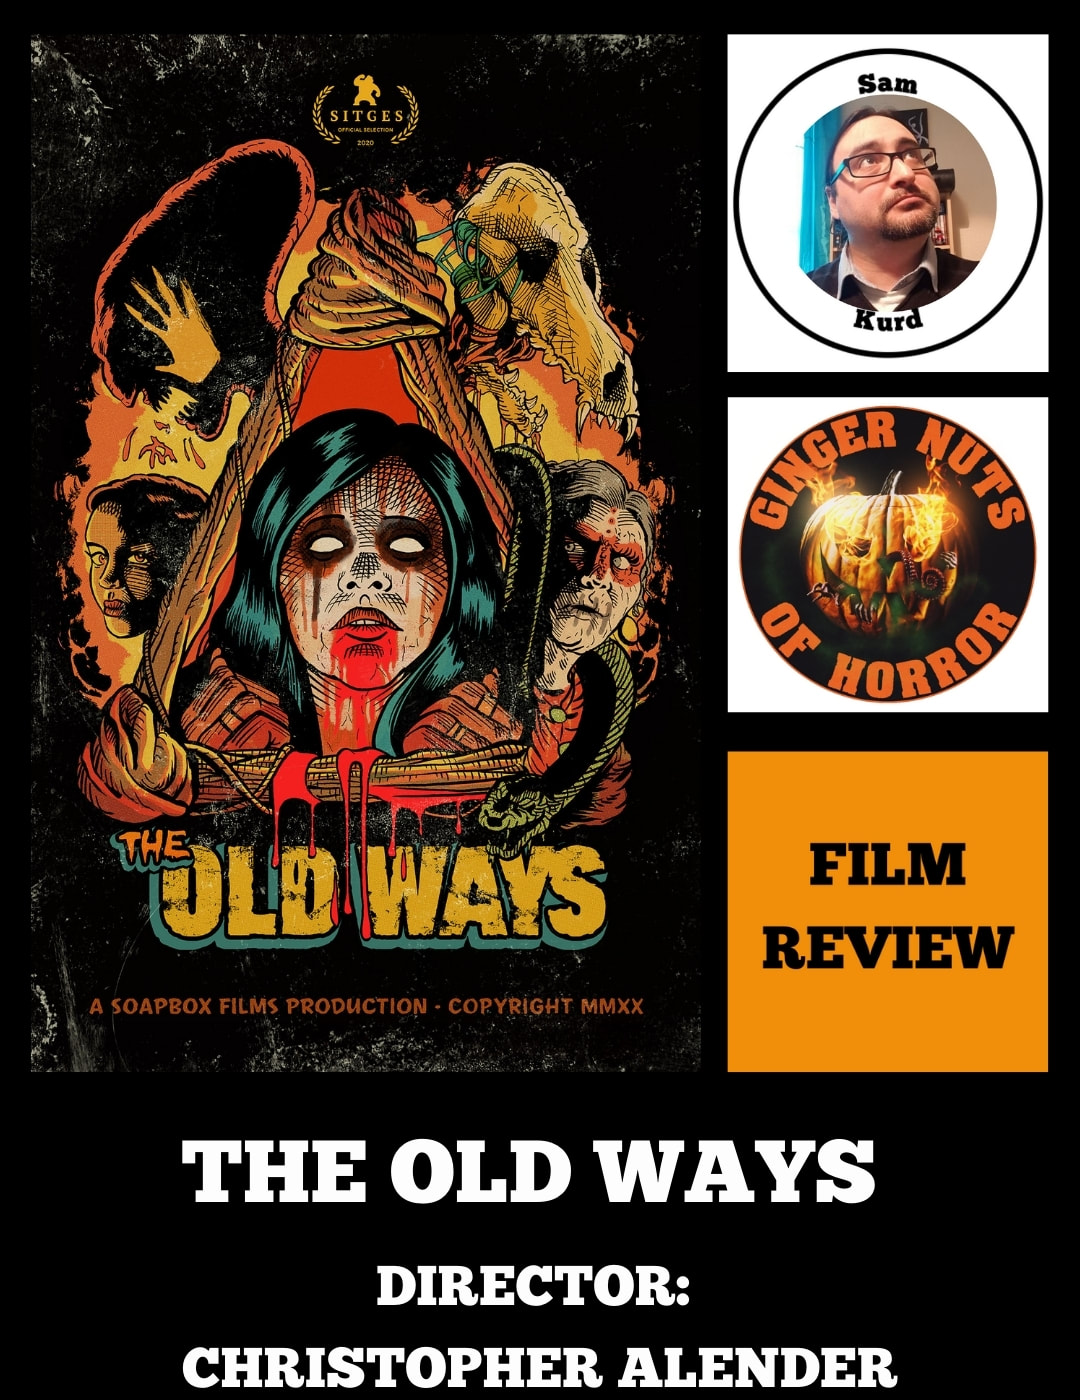 HORROR MOVIE REVIEW THE OLD WAYS (DIRECTOR- CHRISTOPHER ALENDER)